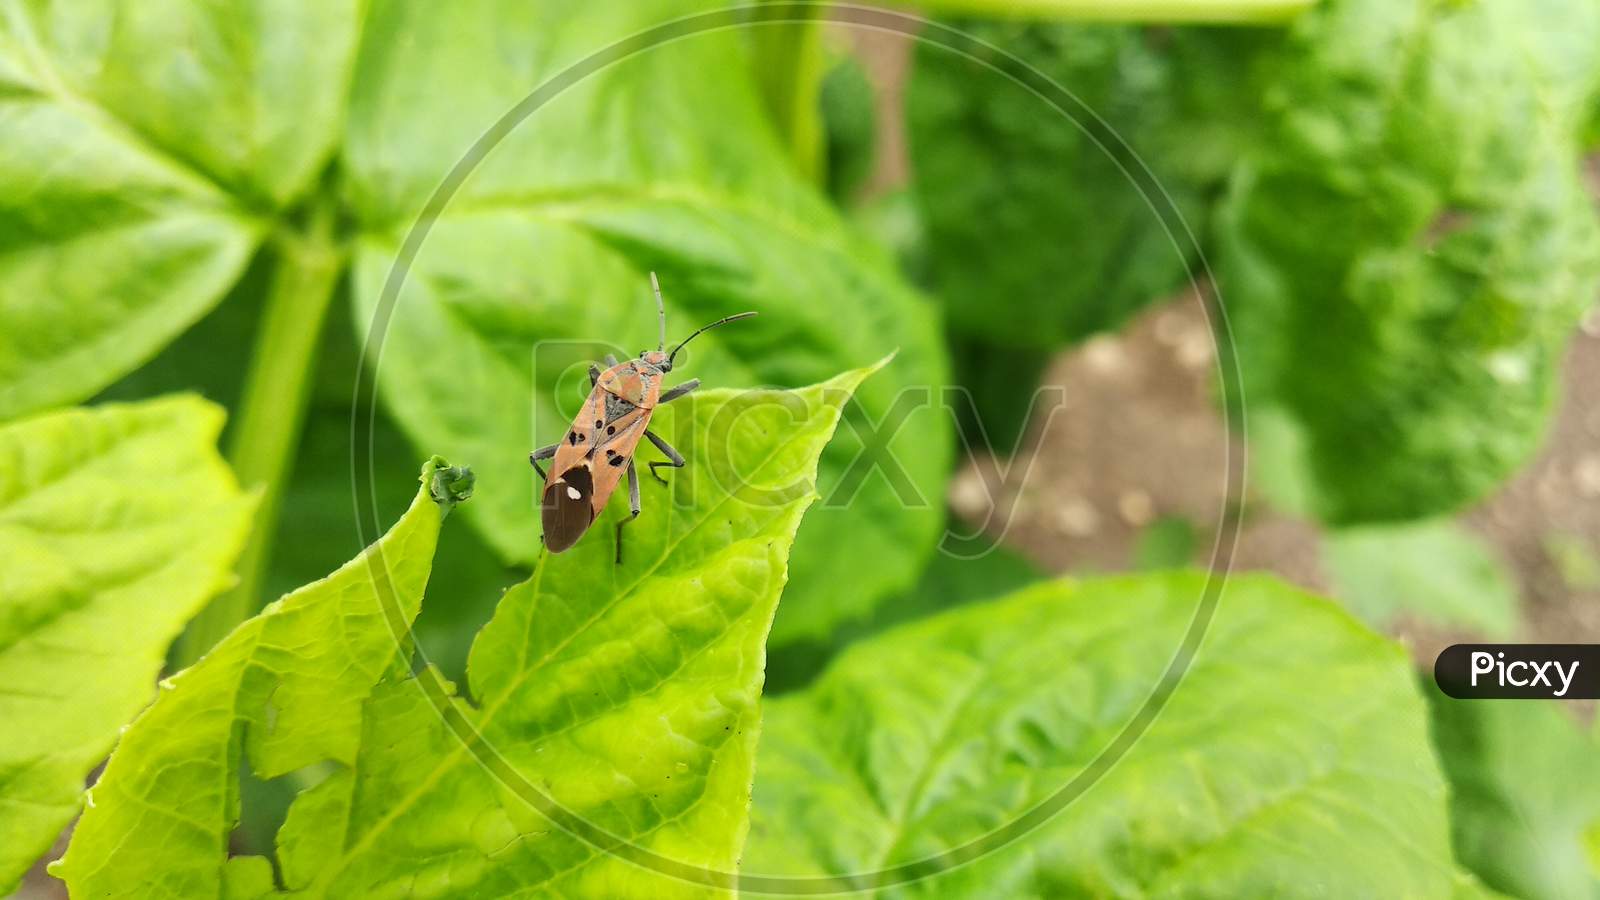 small beautiful insect seating on leaf.7 Aug 2020 india.